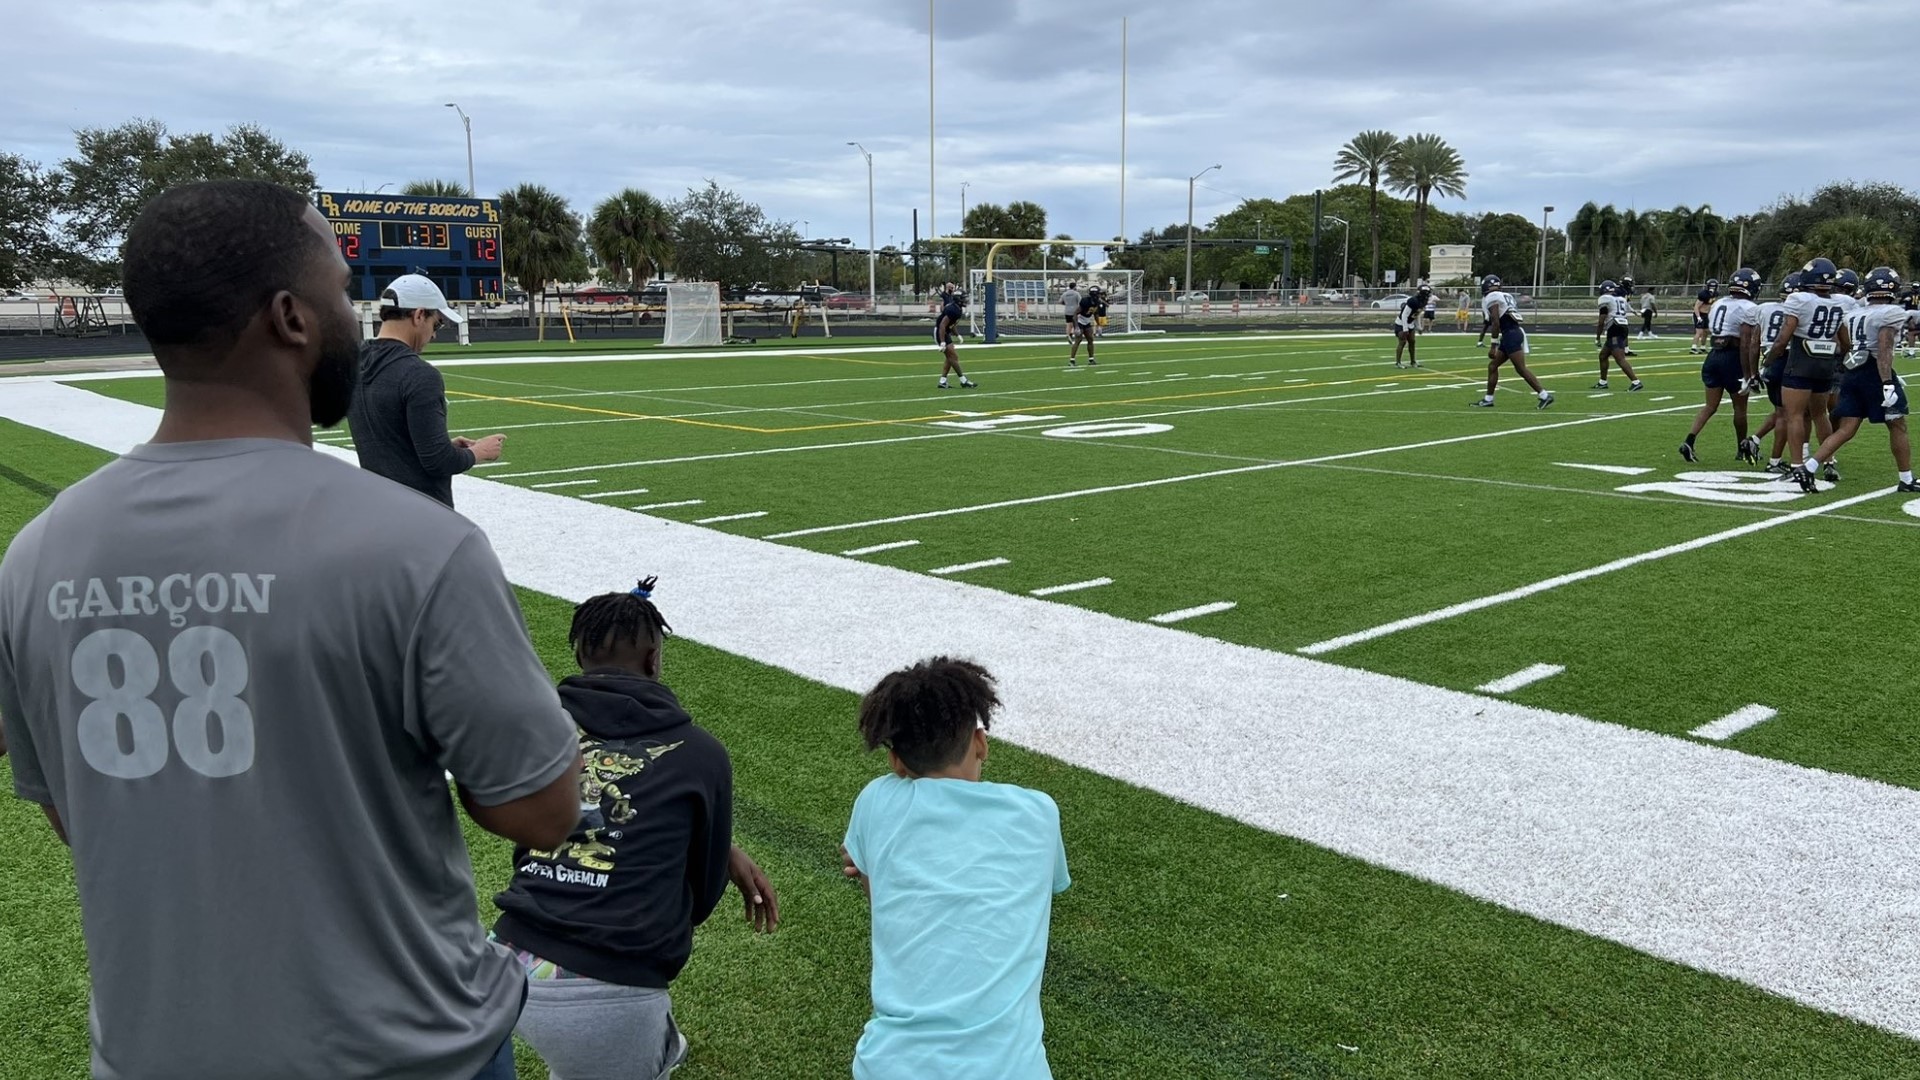 Pierre Garcon, a South Florida native, was at Toledo's practice in Boca Raton to see Rockets head coach Jason Candle, his former college coach at Mount Union.